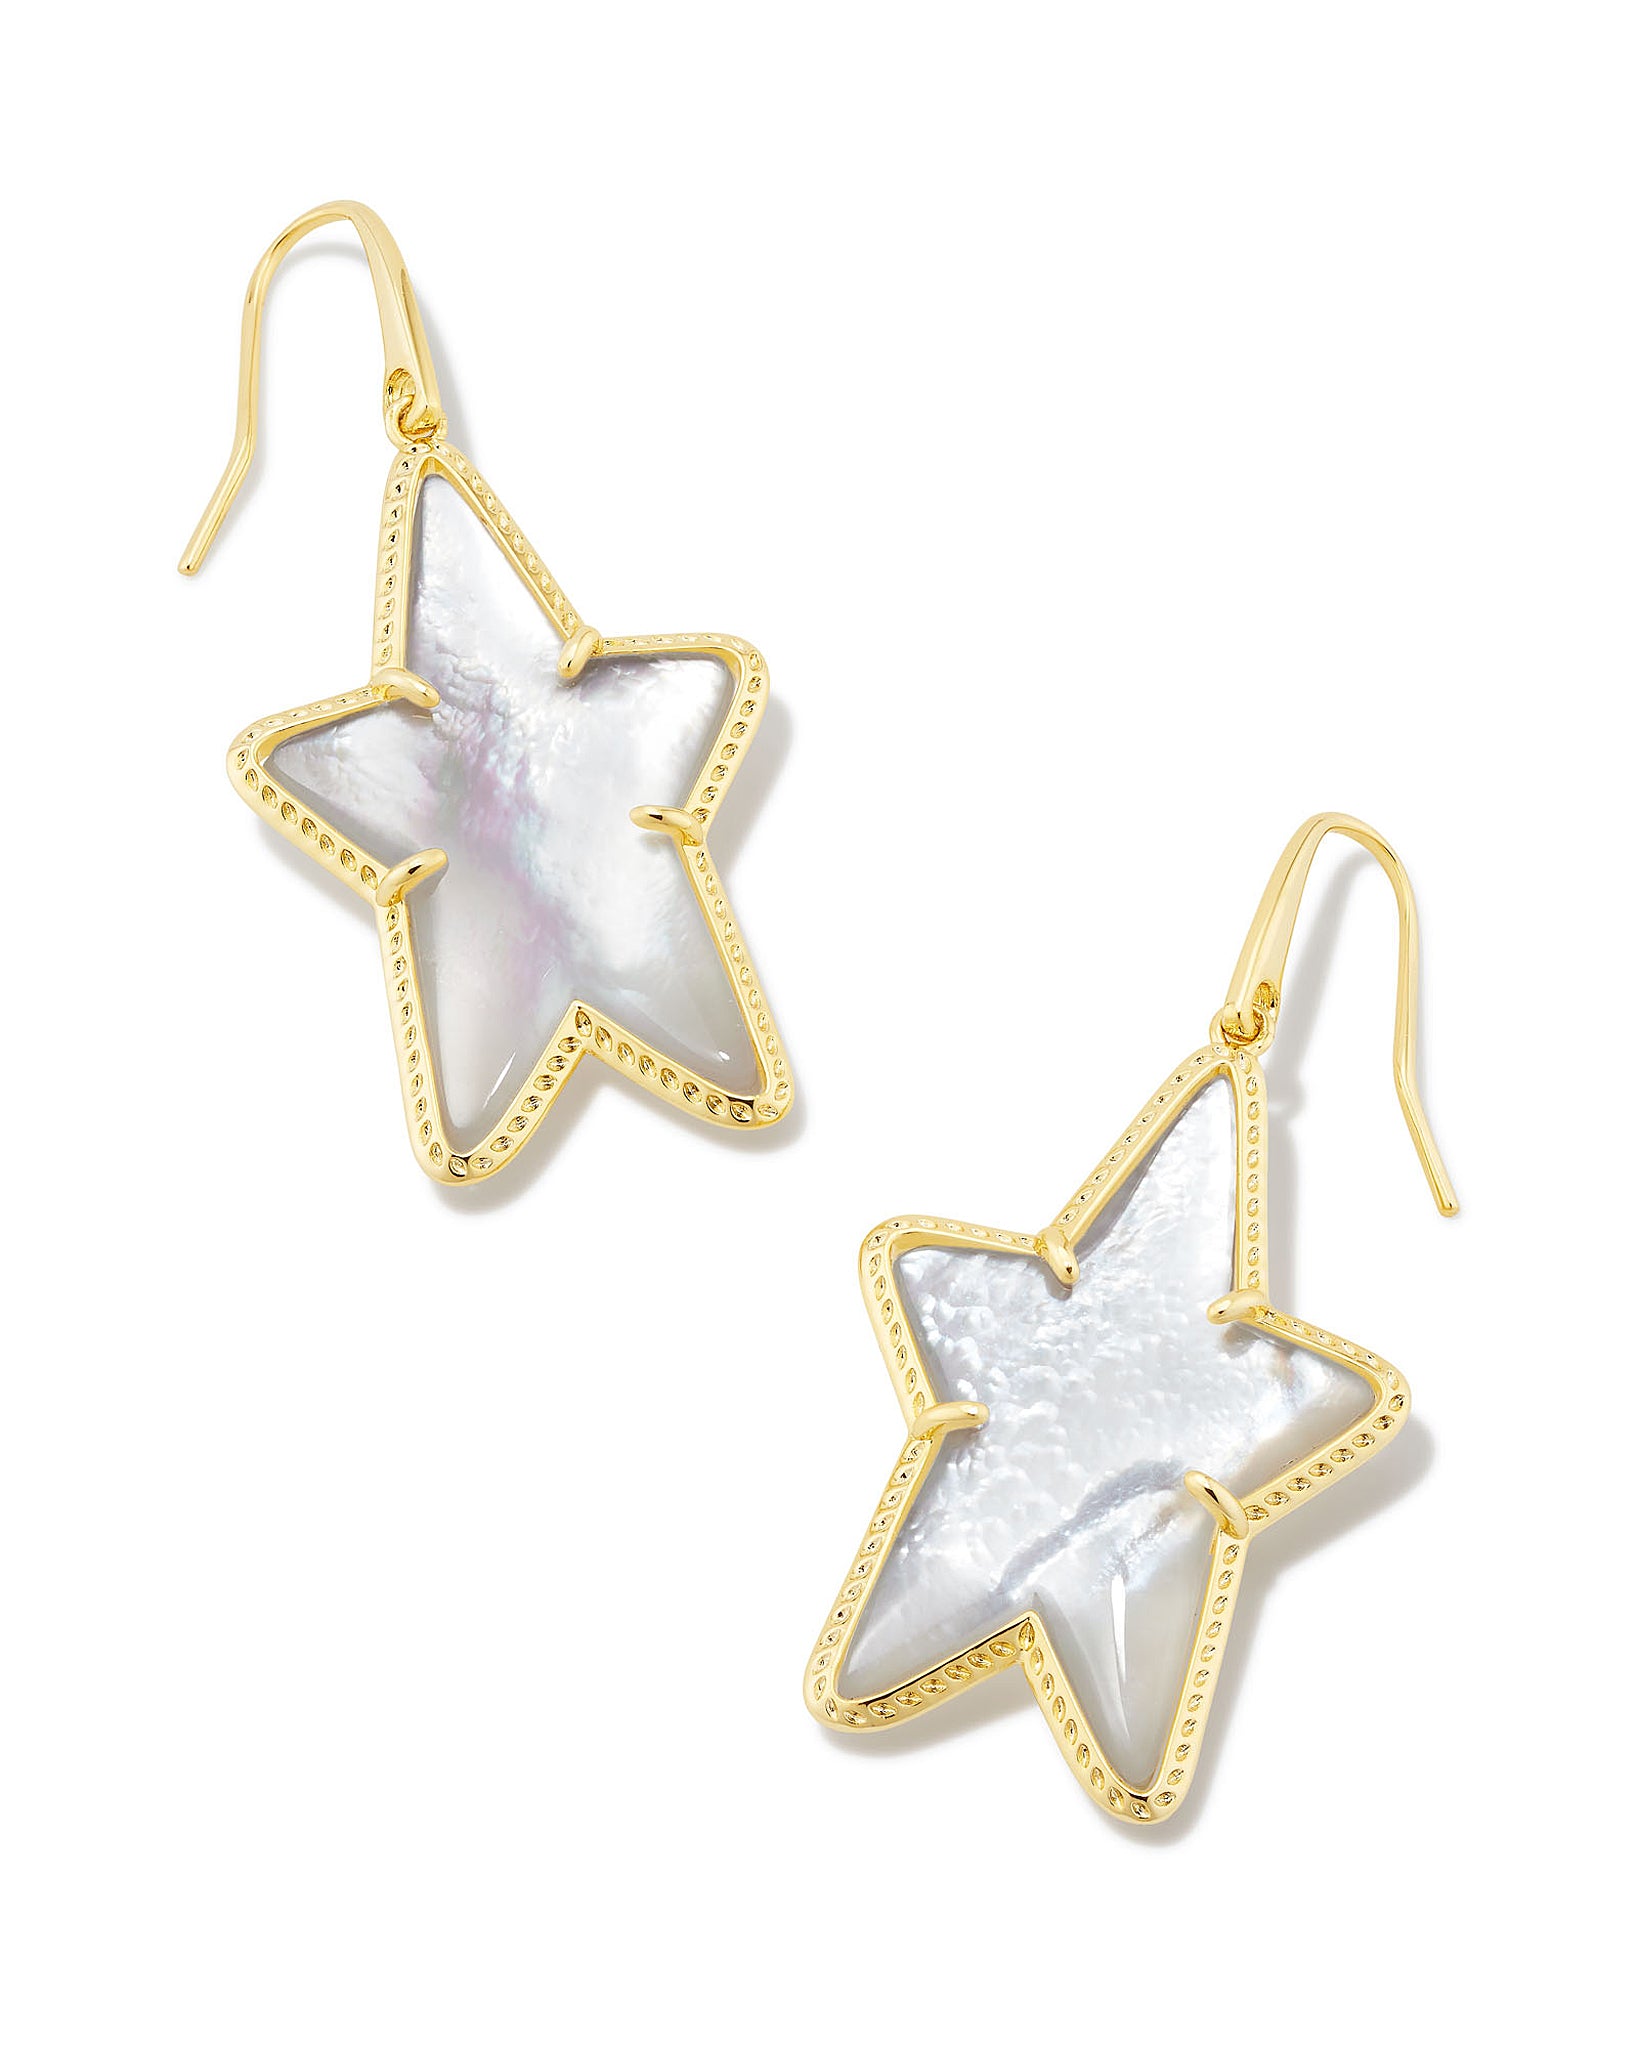 Kendra Scott Ada Star Dangle Earrings in Ivory Mother of Pearl and Gold